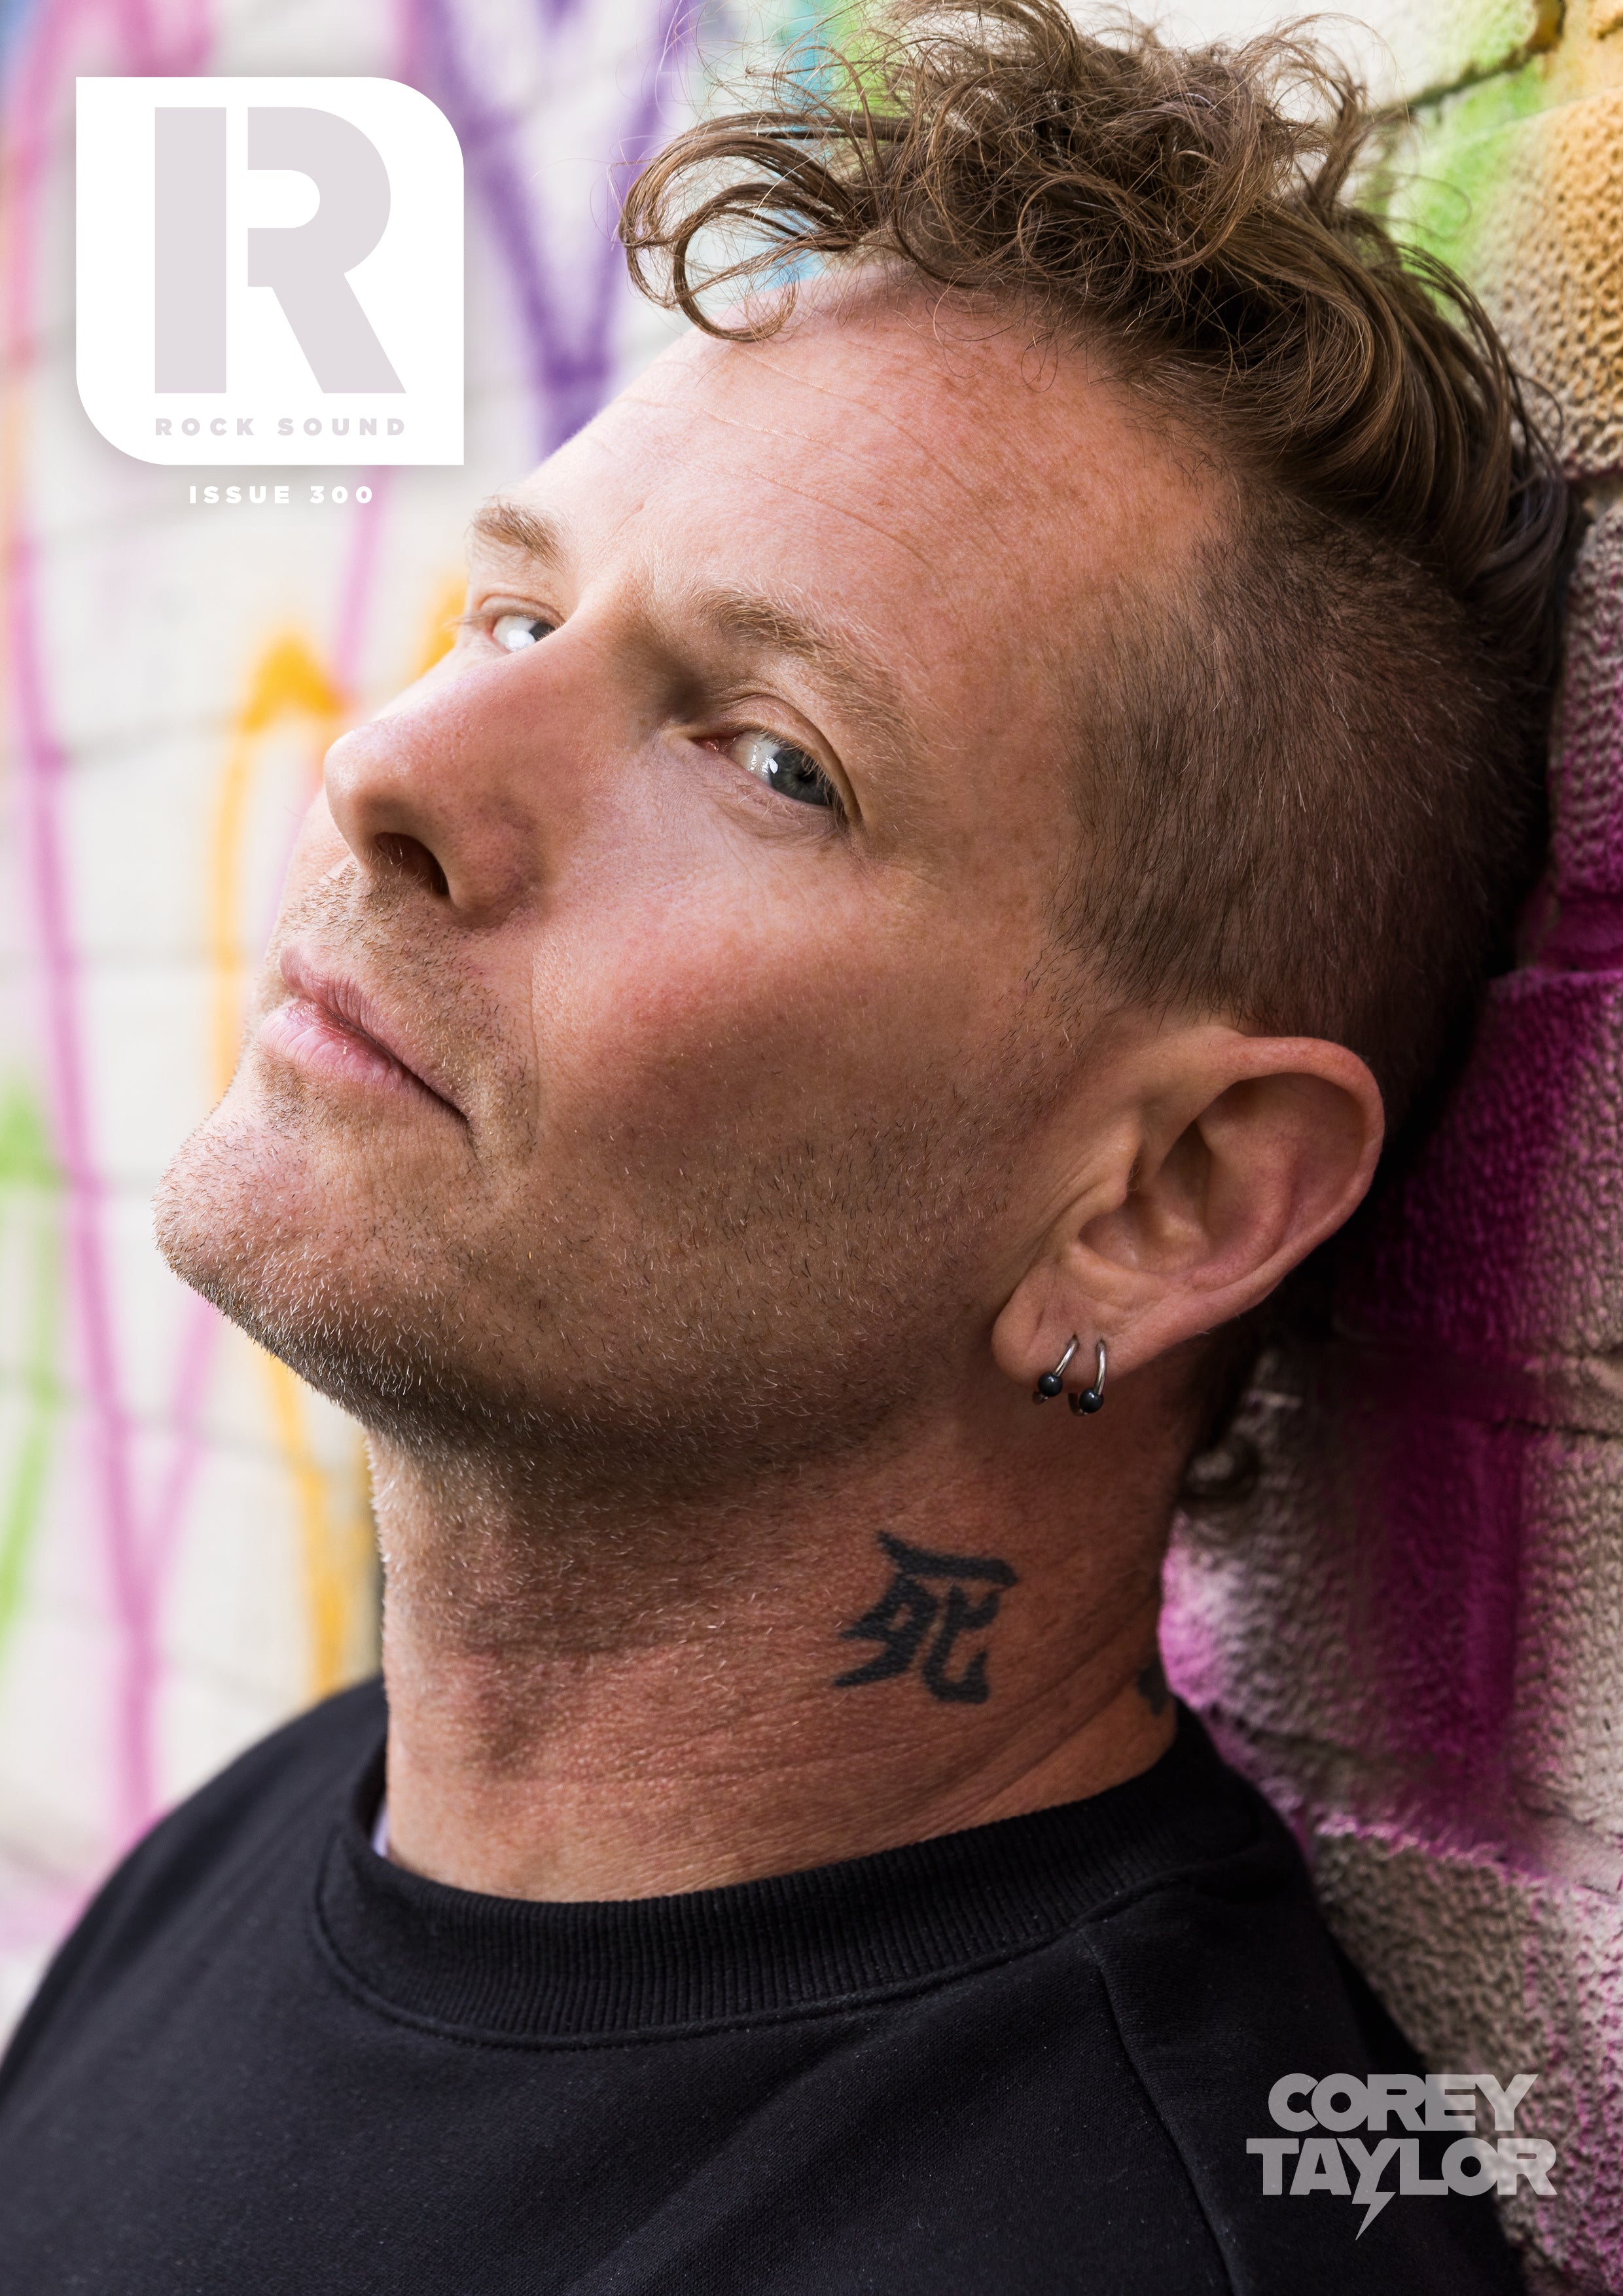 Rock Sound Issue 300 – Corey Taylor T-Shirt Pack